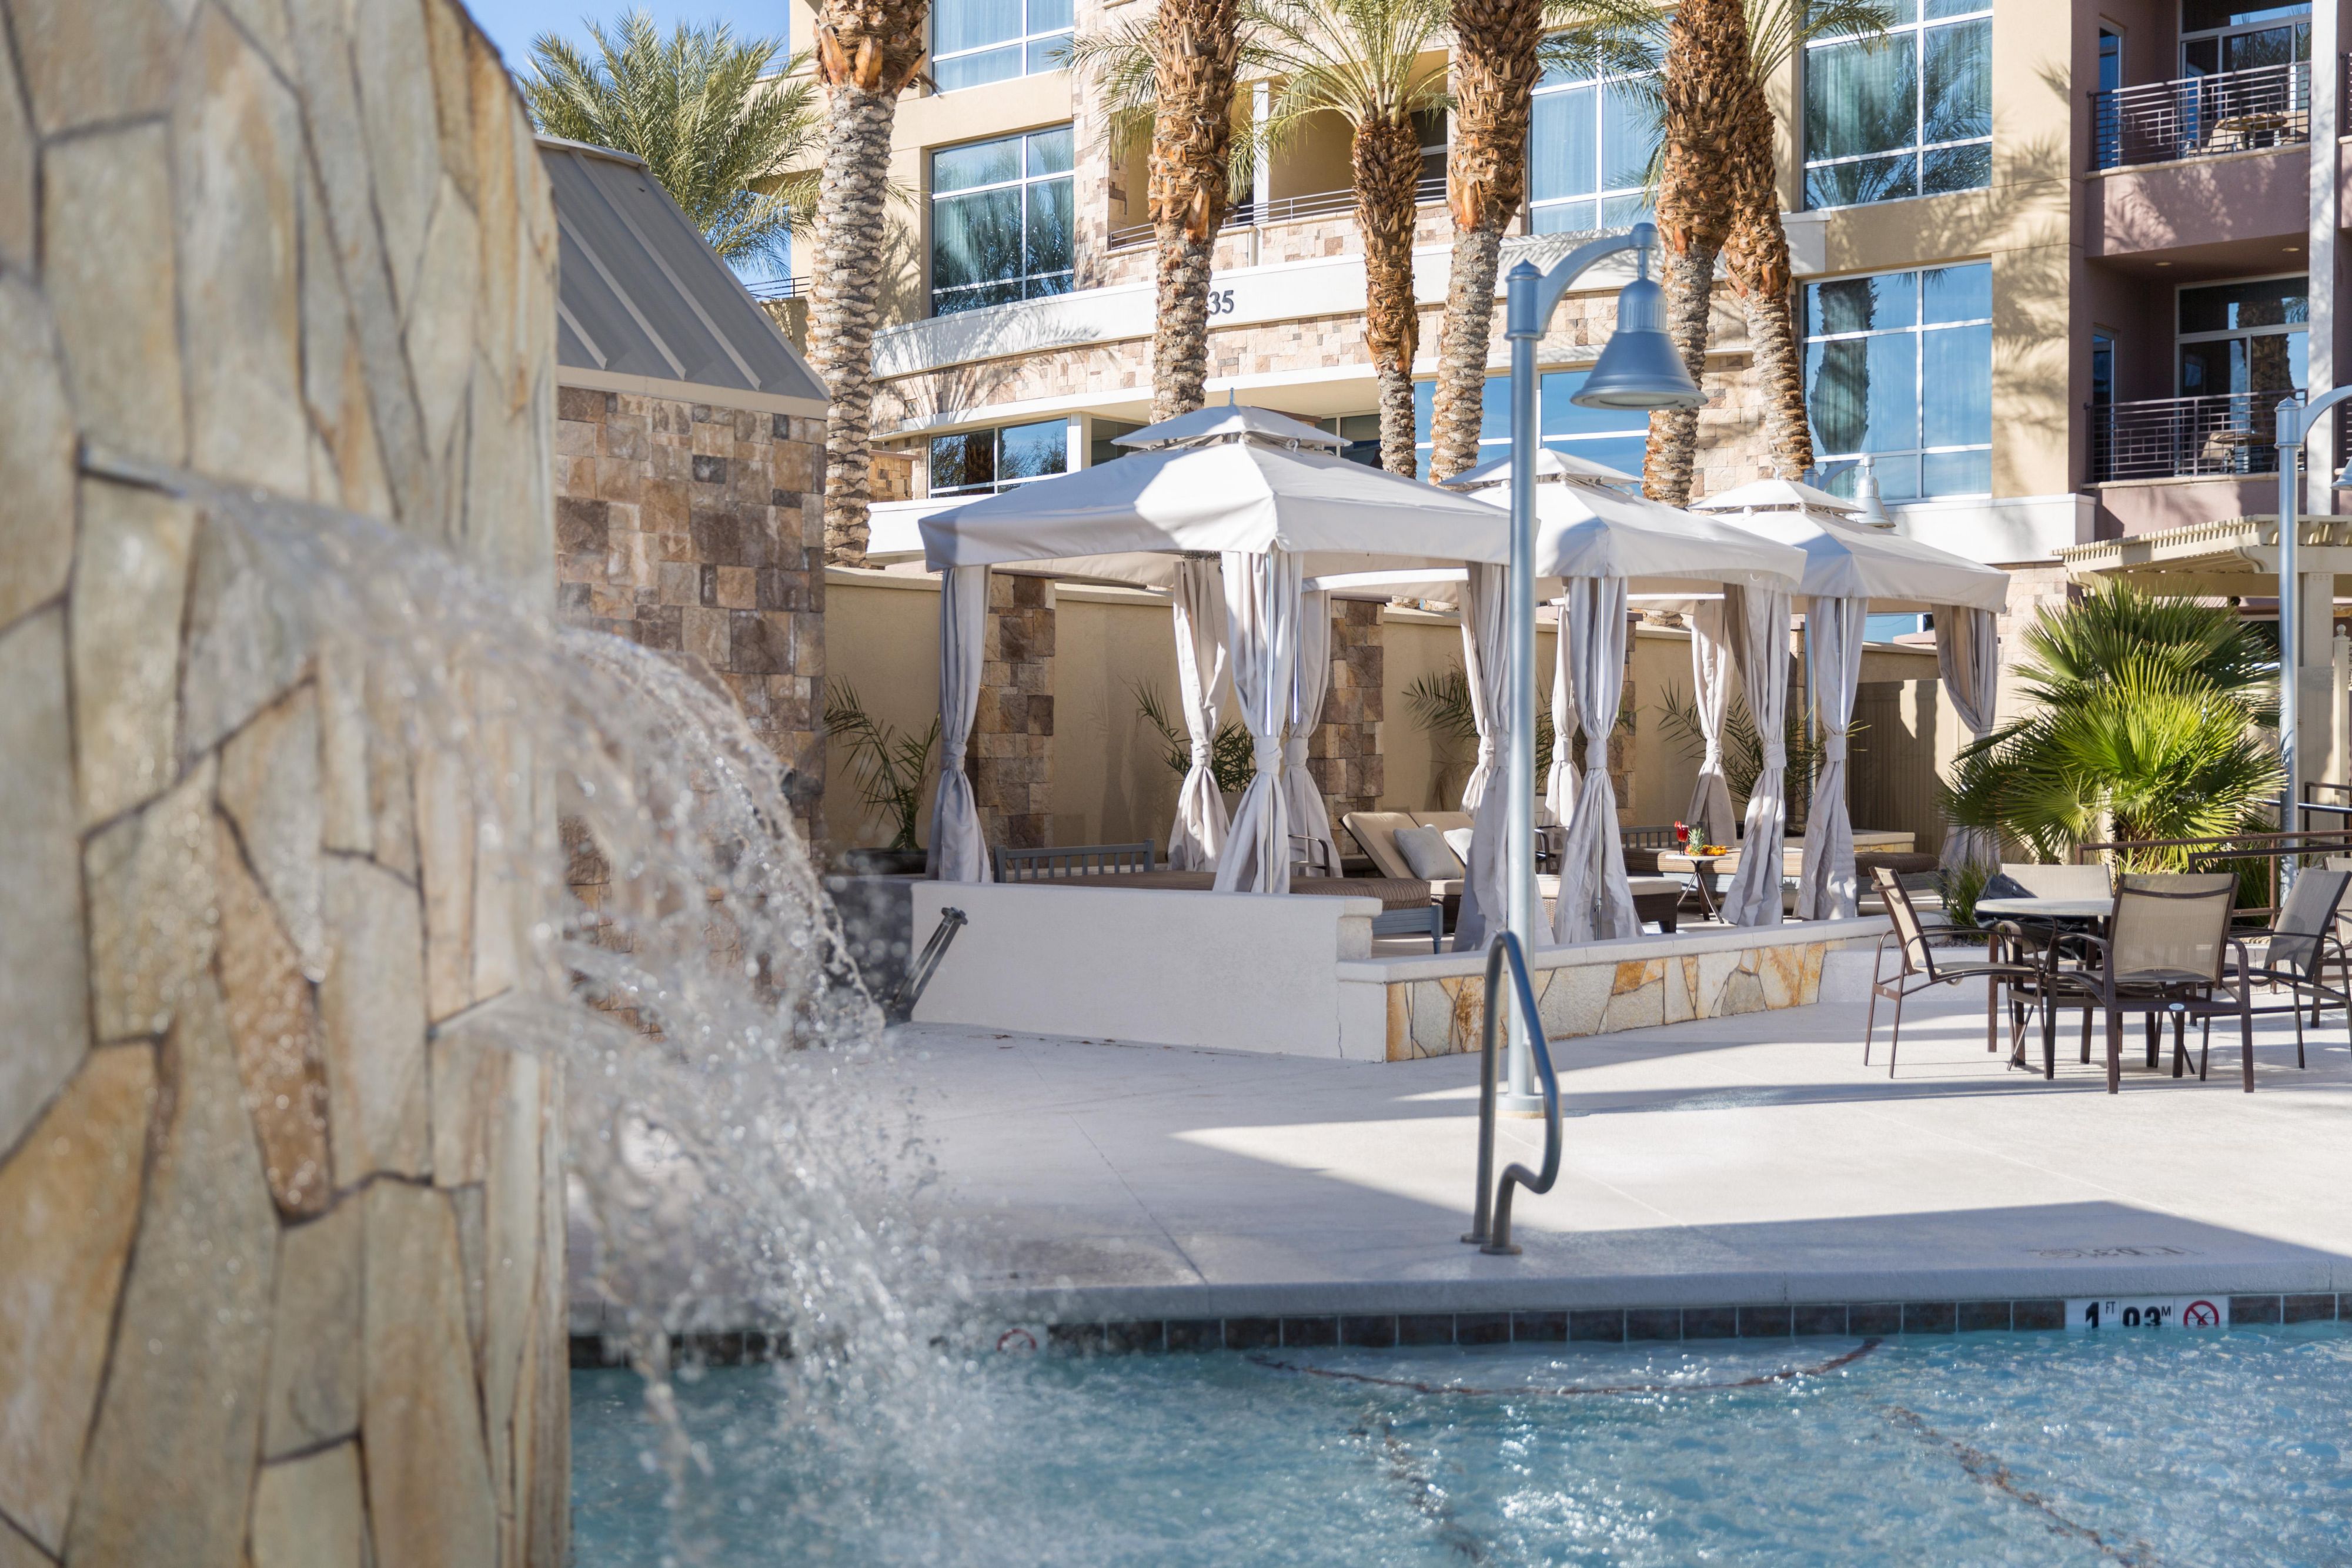  The Staybridge Suites Las Vegas  offers  resort style  outdoor heated pool  with two hut tubs. Our  cabana area provides  upscale relaxation.